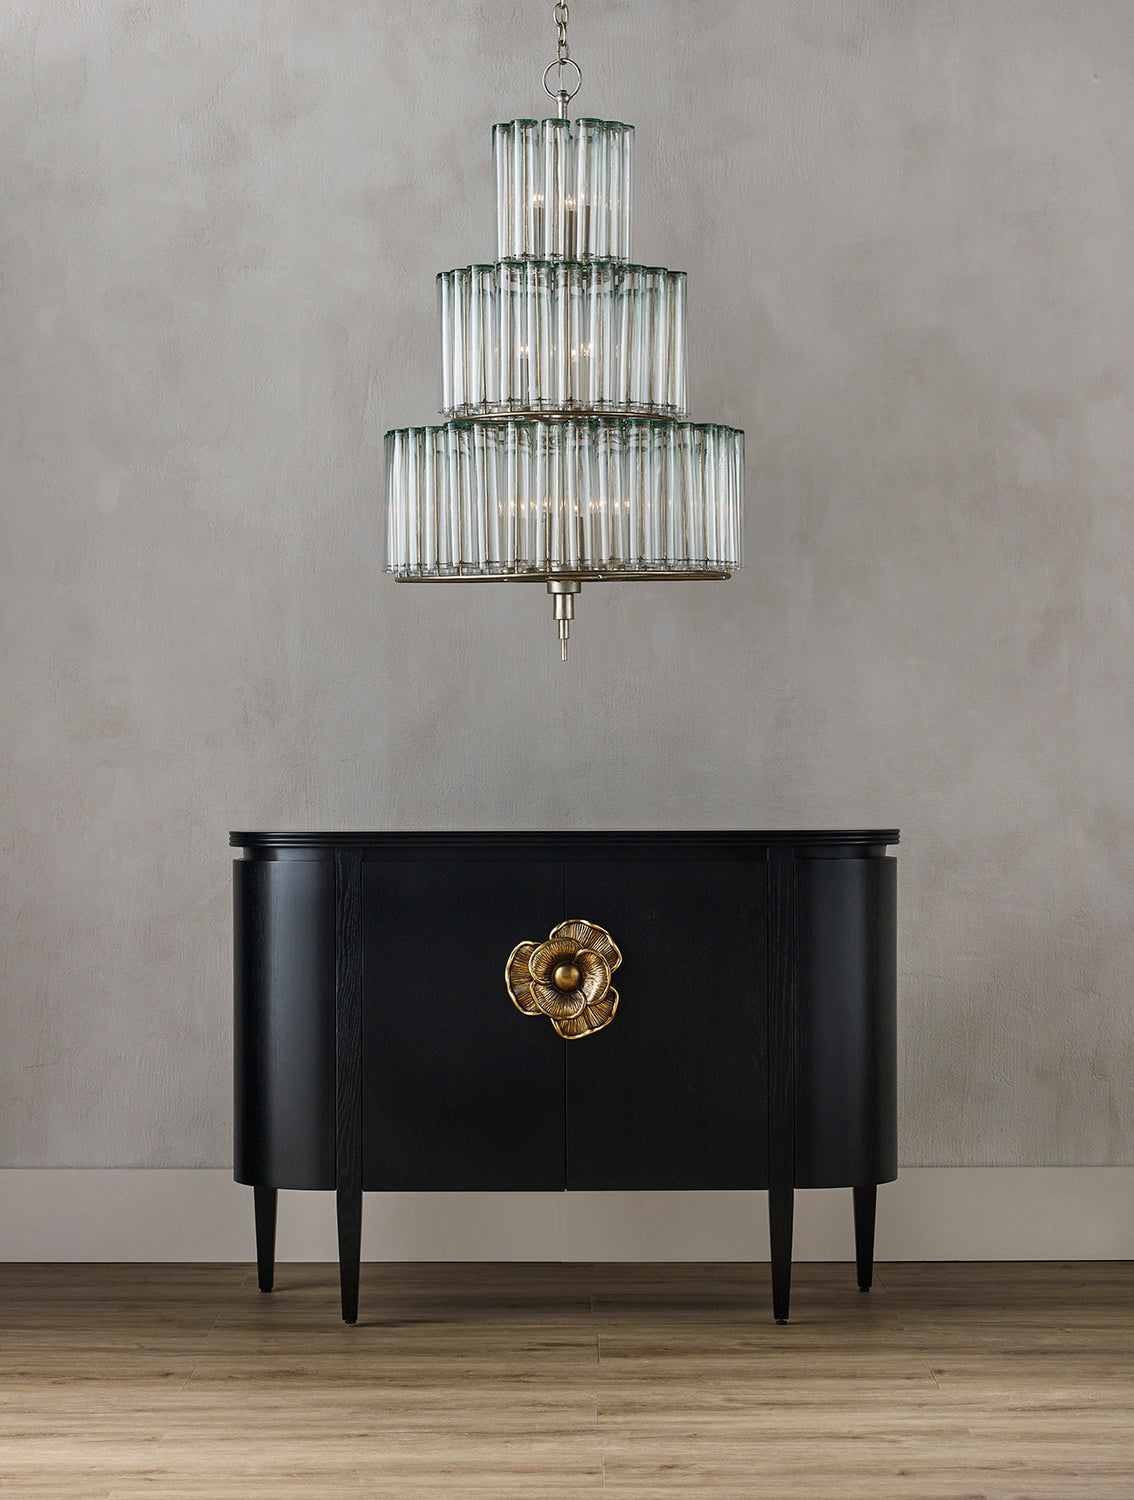 12 Light Chandelier from the Bevilacqua collection in Silver Leaf finish